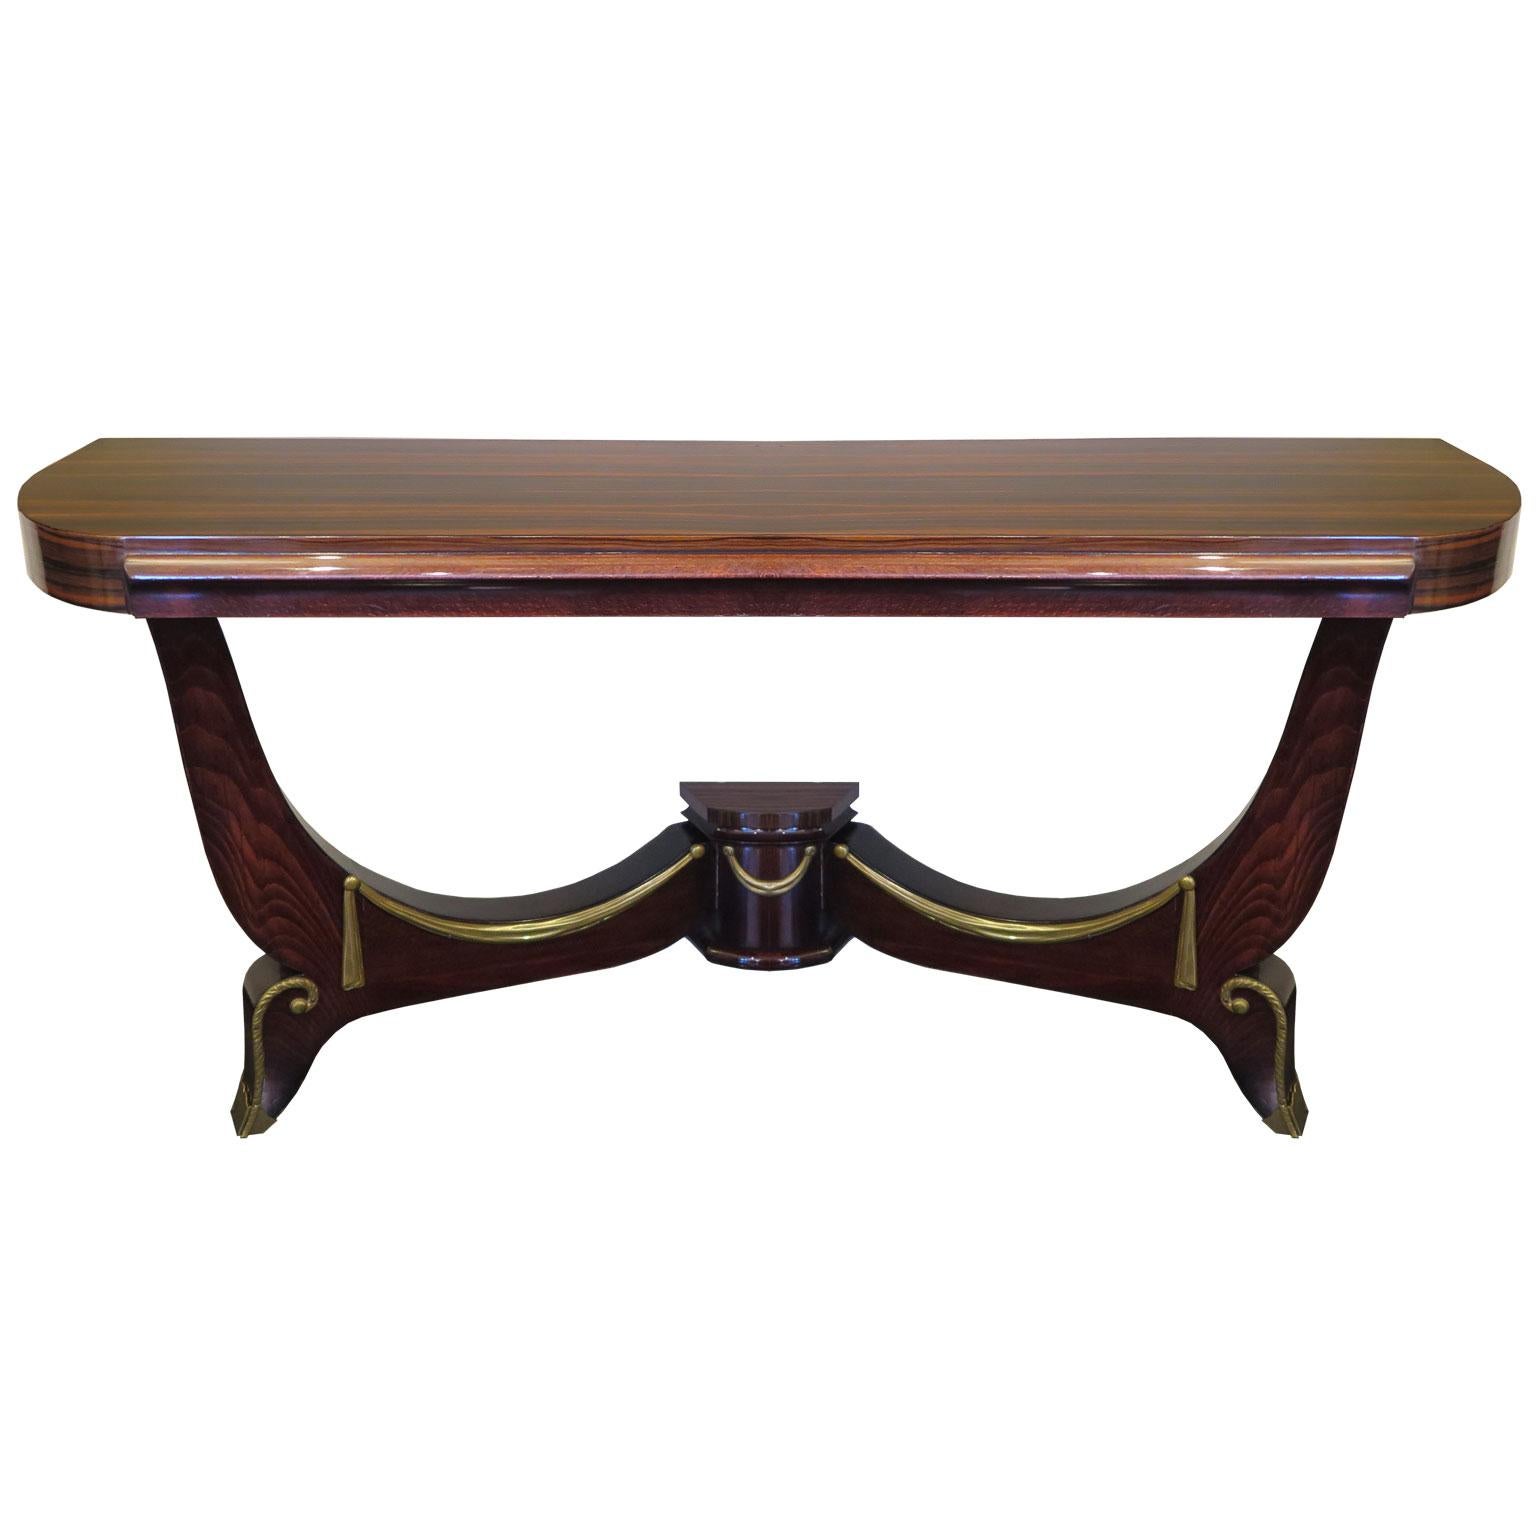 Art Deco Demilune Console in Macassar and Mahogany with Brass Fittings